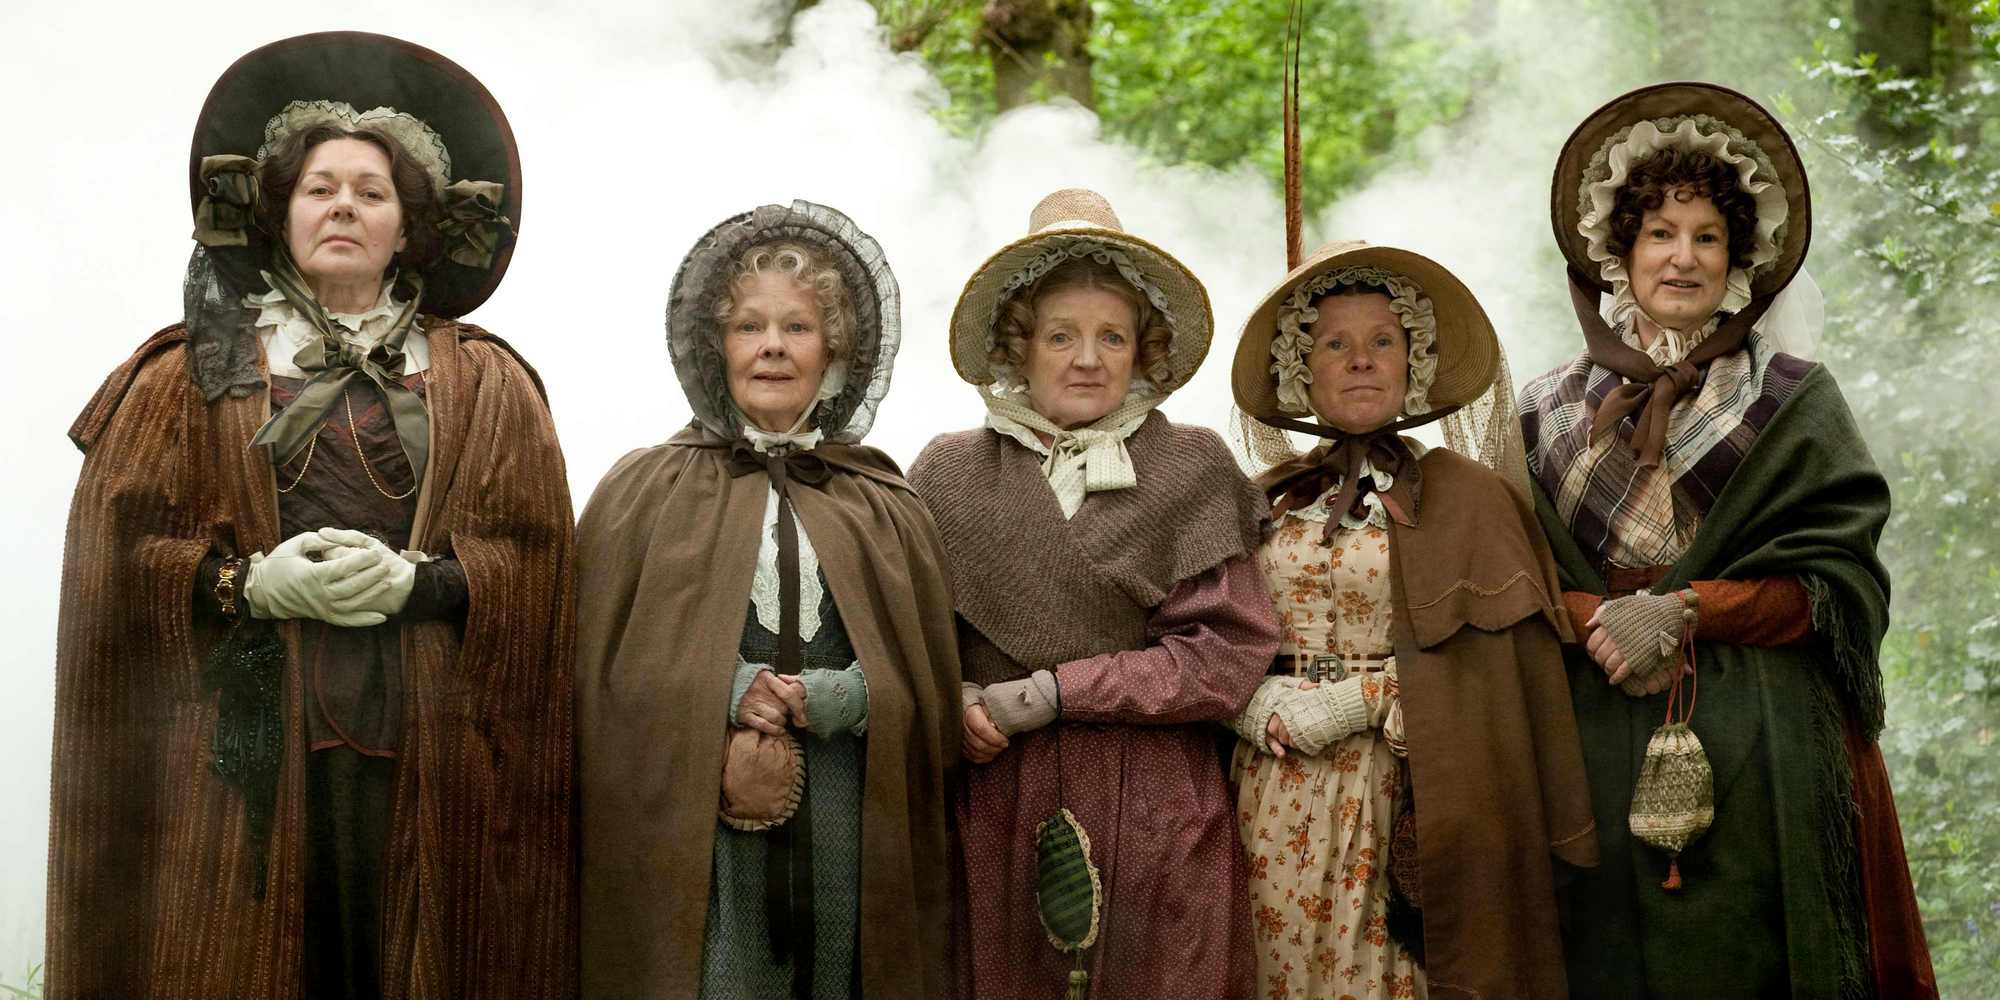 The cast of Cranford